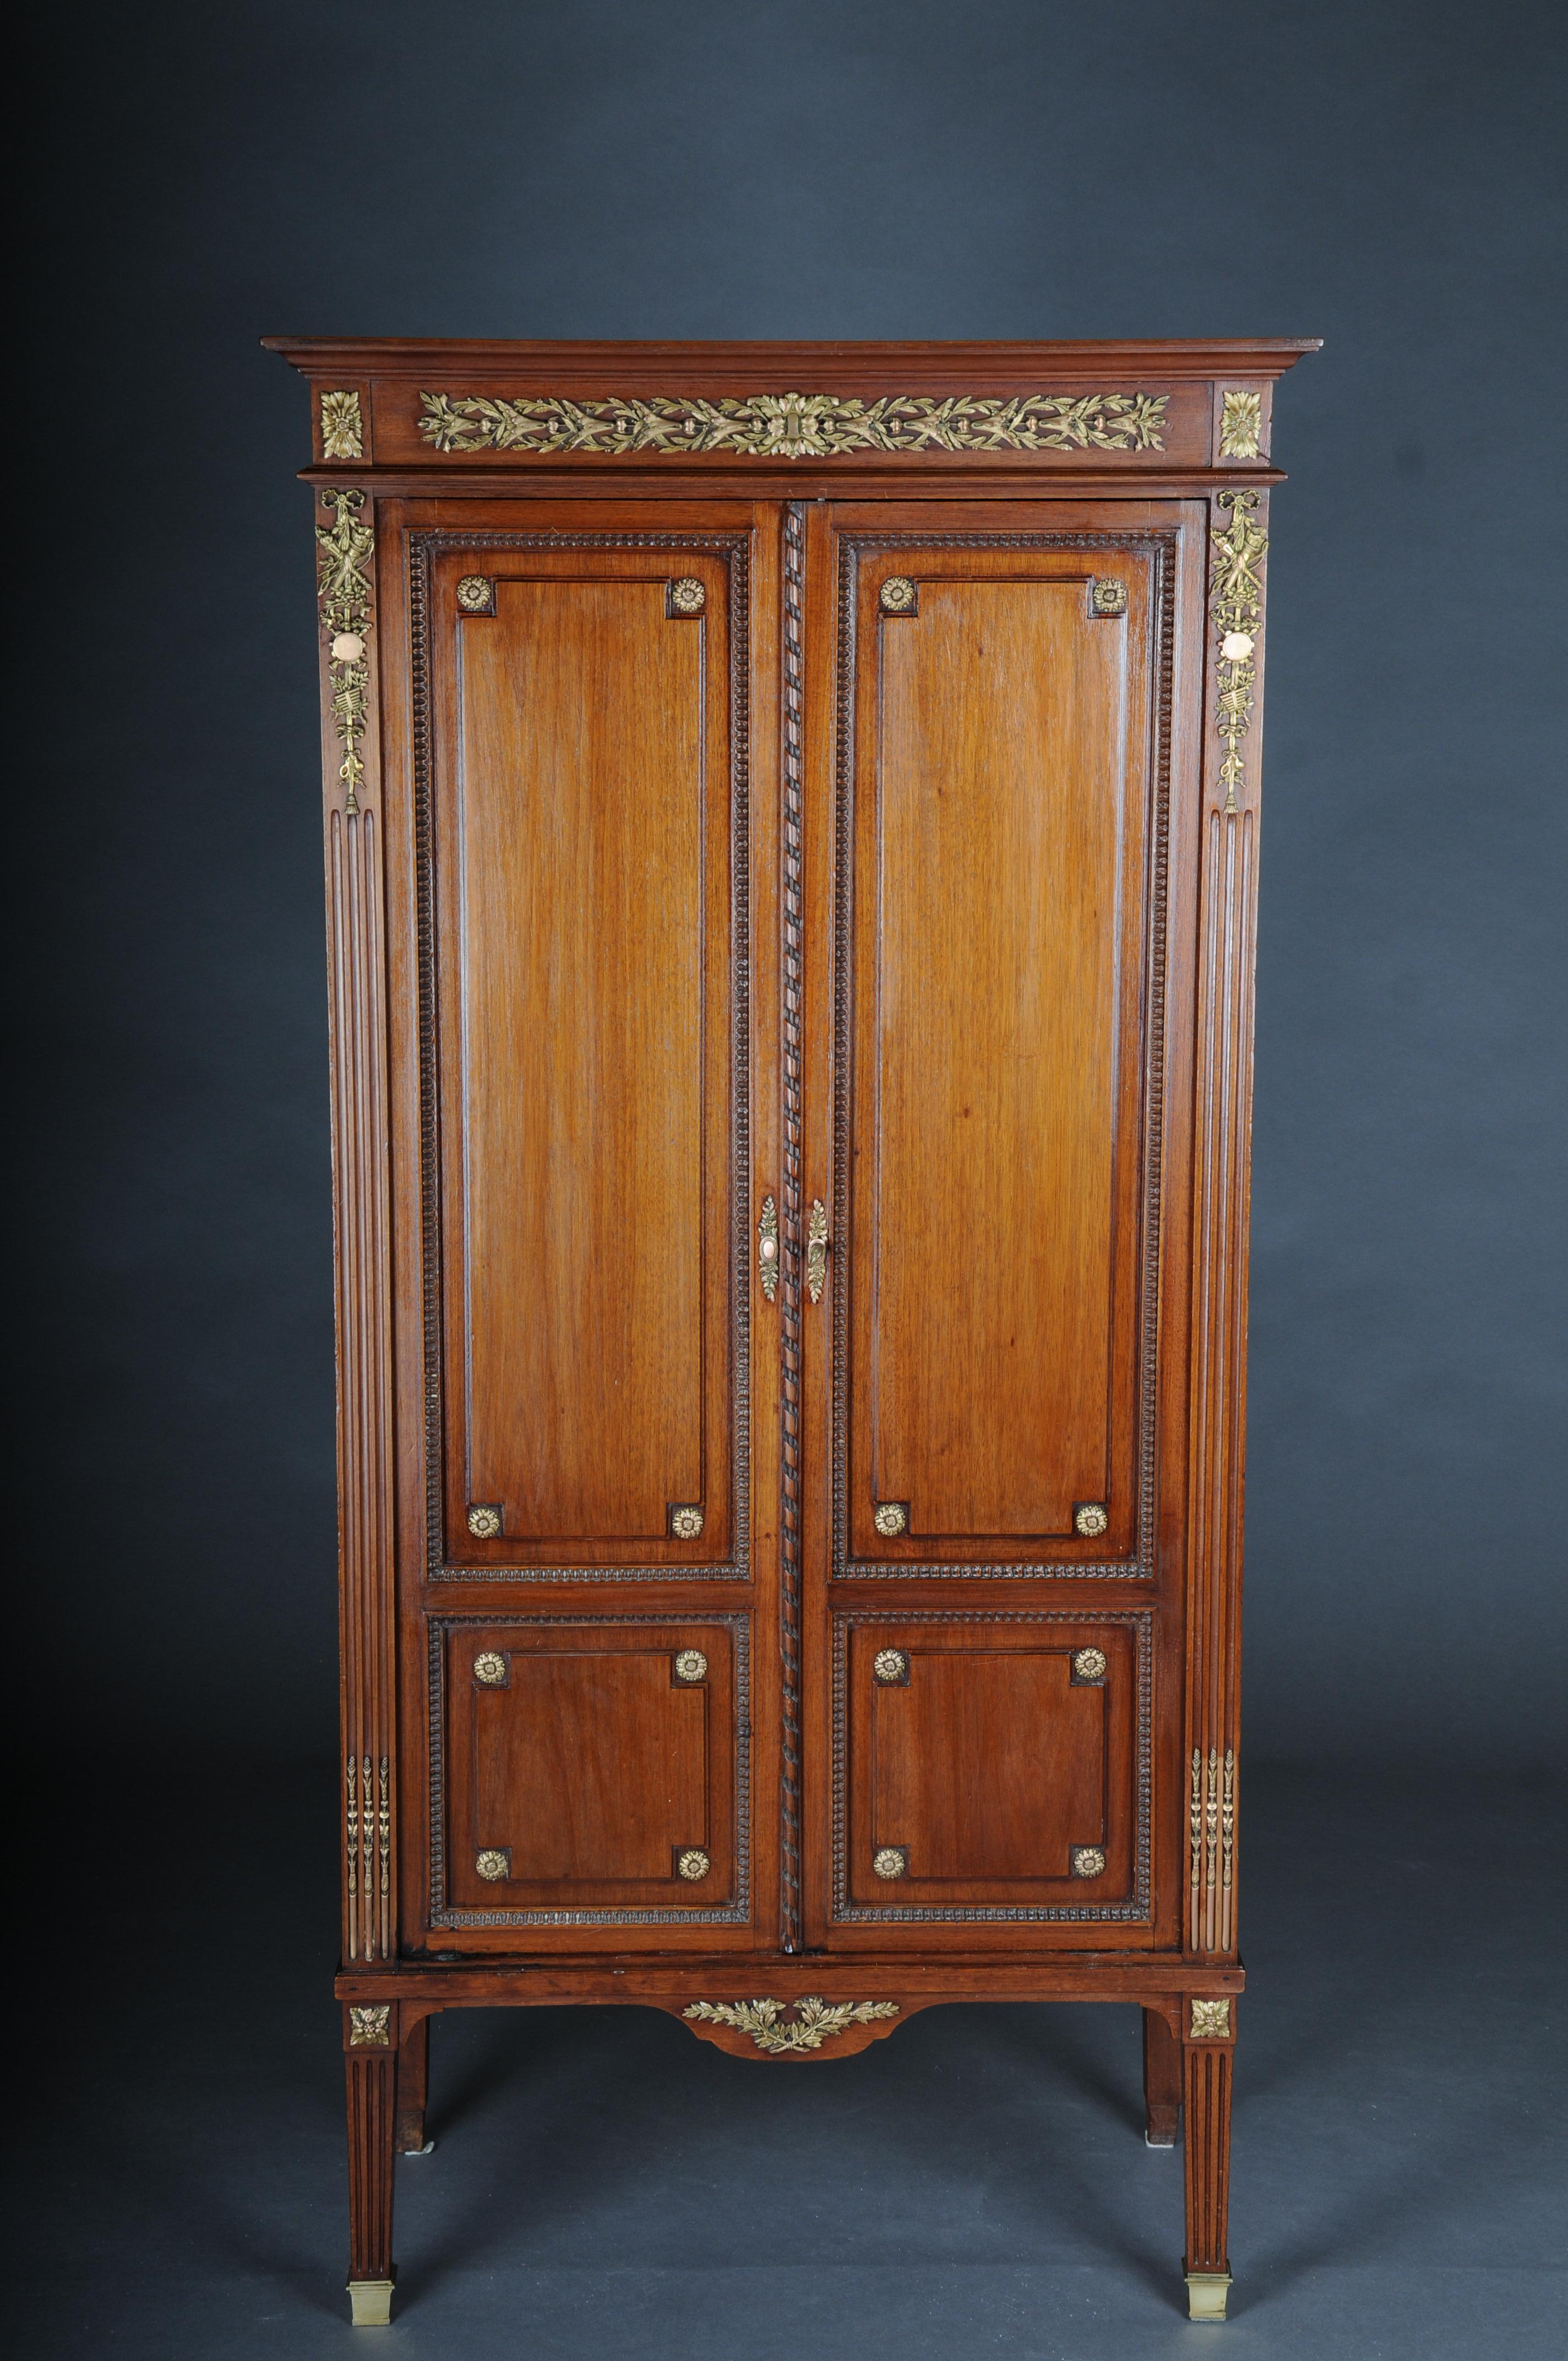 Rare delicate mahogany music cabinet around 1880, Louis XVI

Solid mahogany body. The chest of drawers is a so-called music cabinet/tall cabinet. Very elegant piece of furniture standing on high square legs in a rectangular body. Extensively